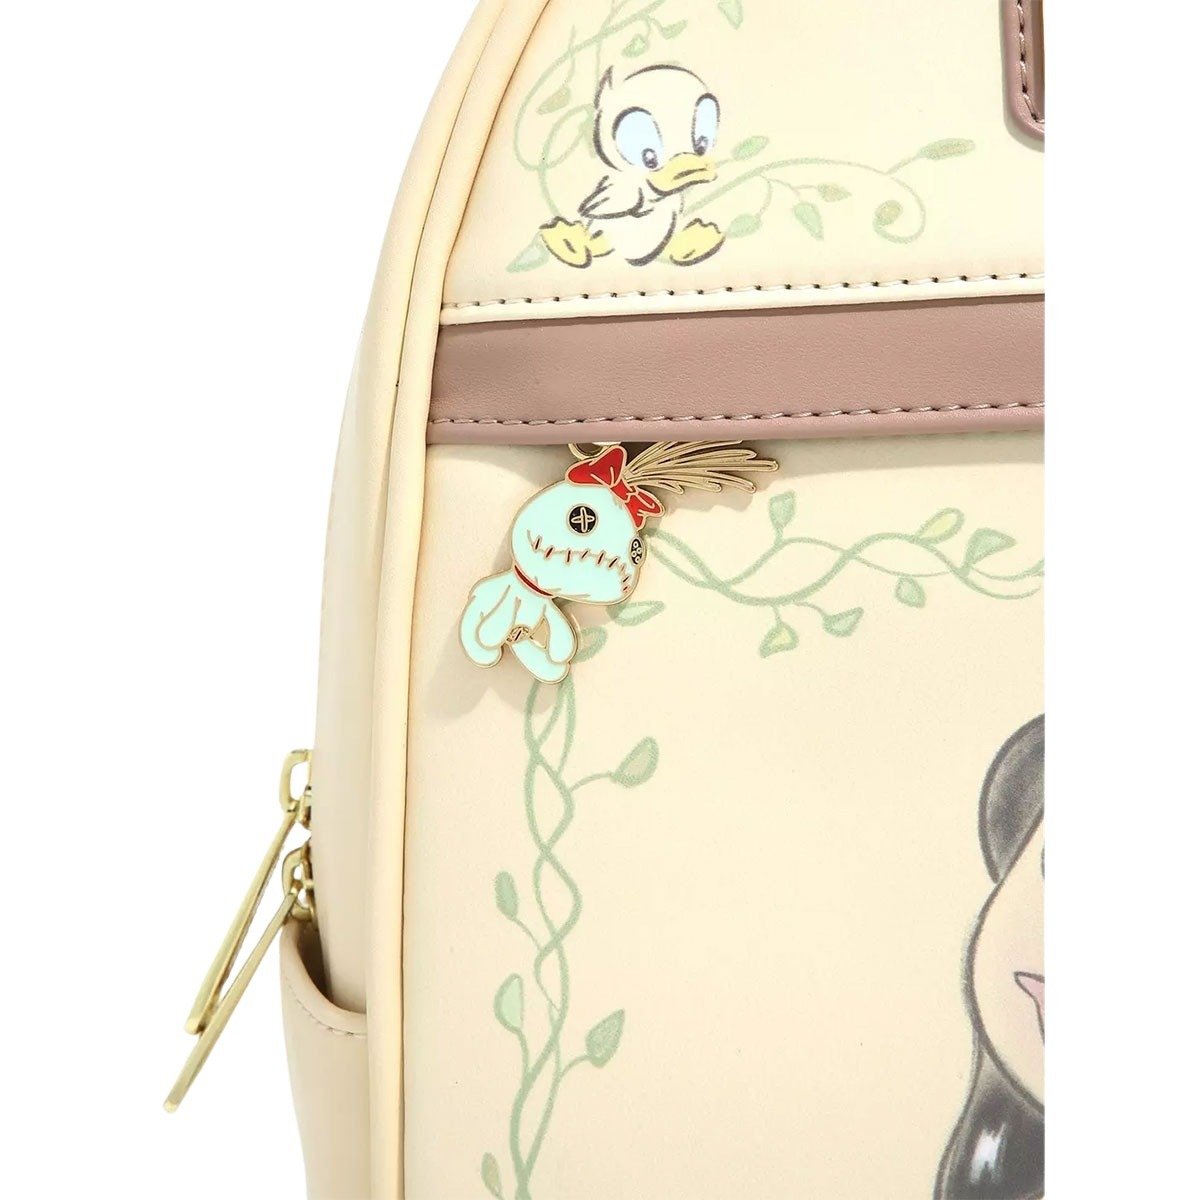 Front pocket close-up: Featuring a small duckling and a charm of a stitched doll with a feather.